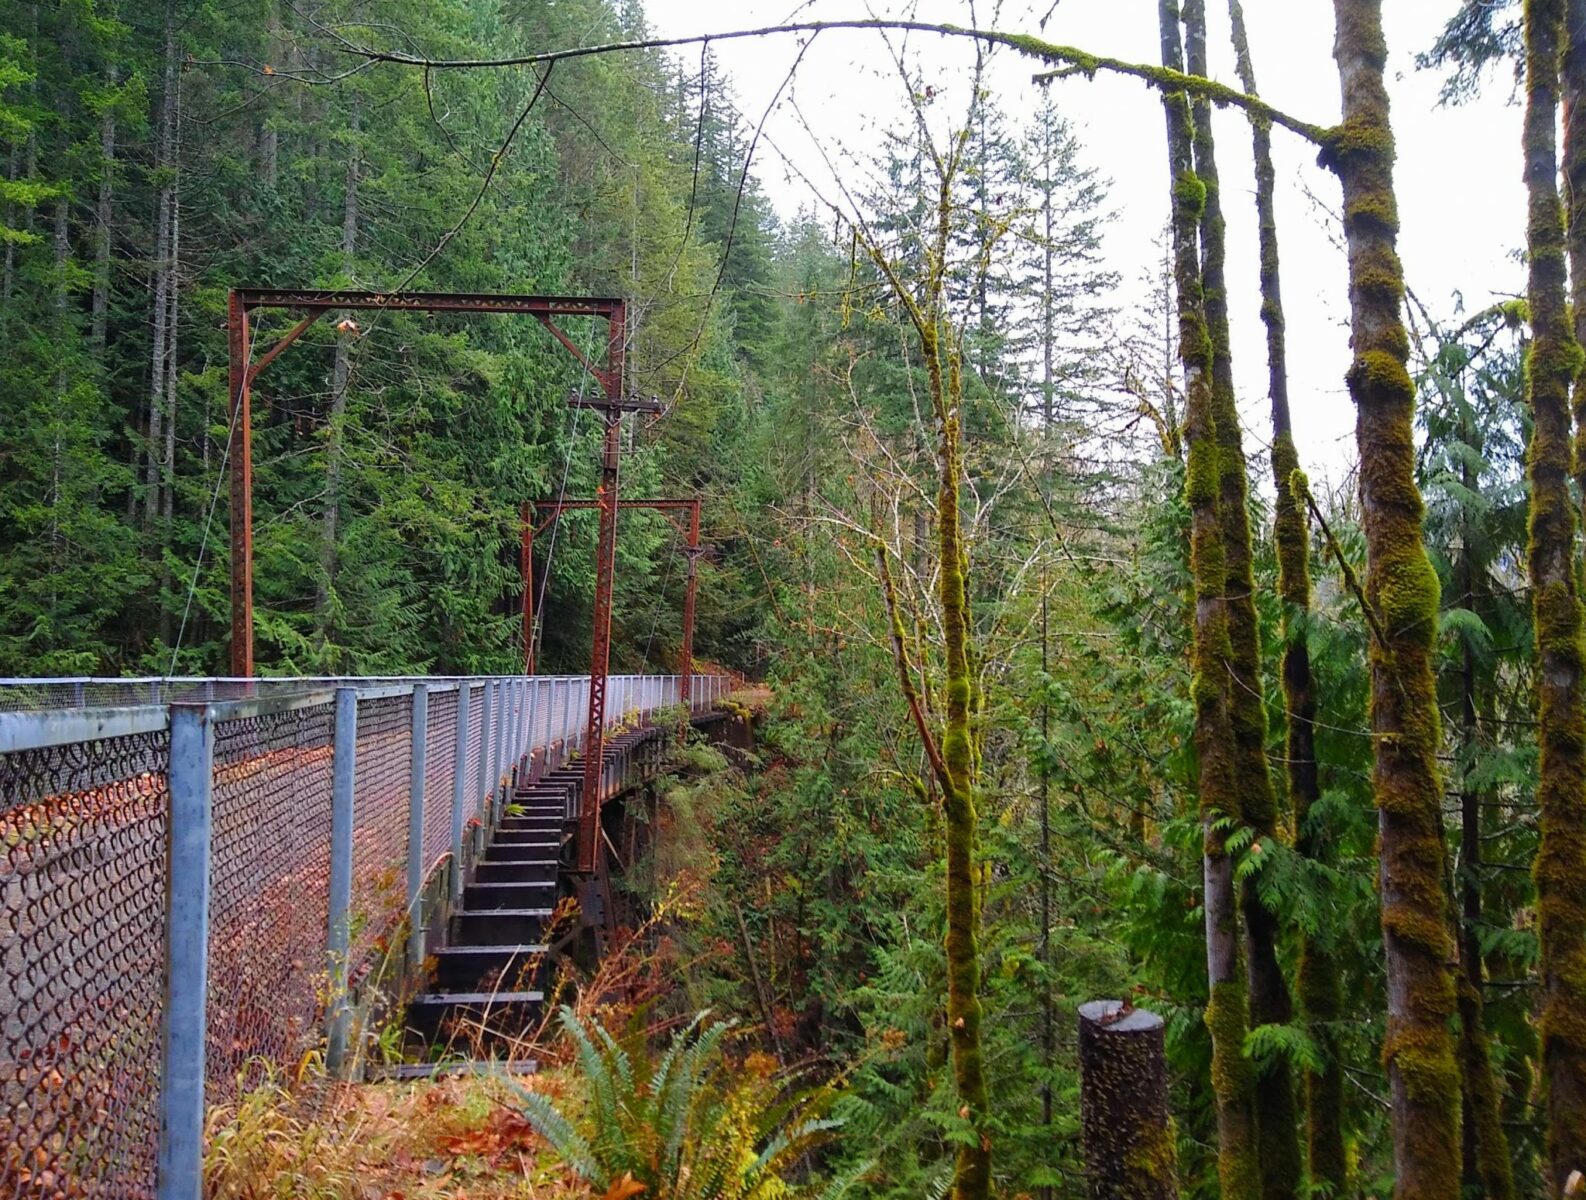 A converted trail bridge to a trail over a steep ravine covered with trees, ferns and moss.